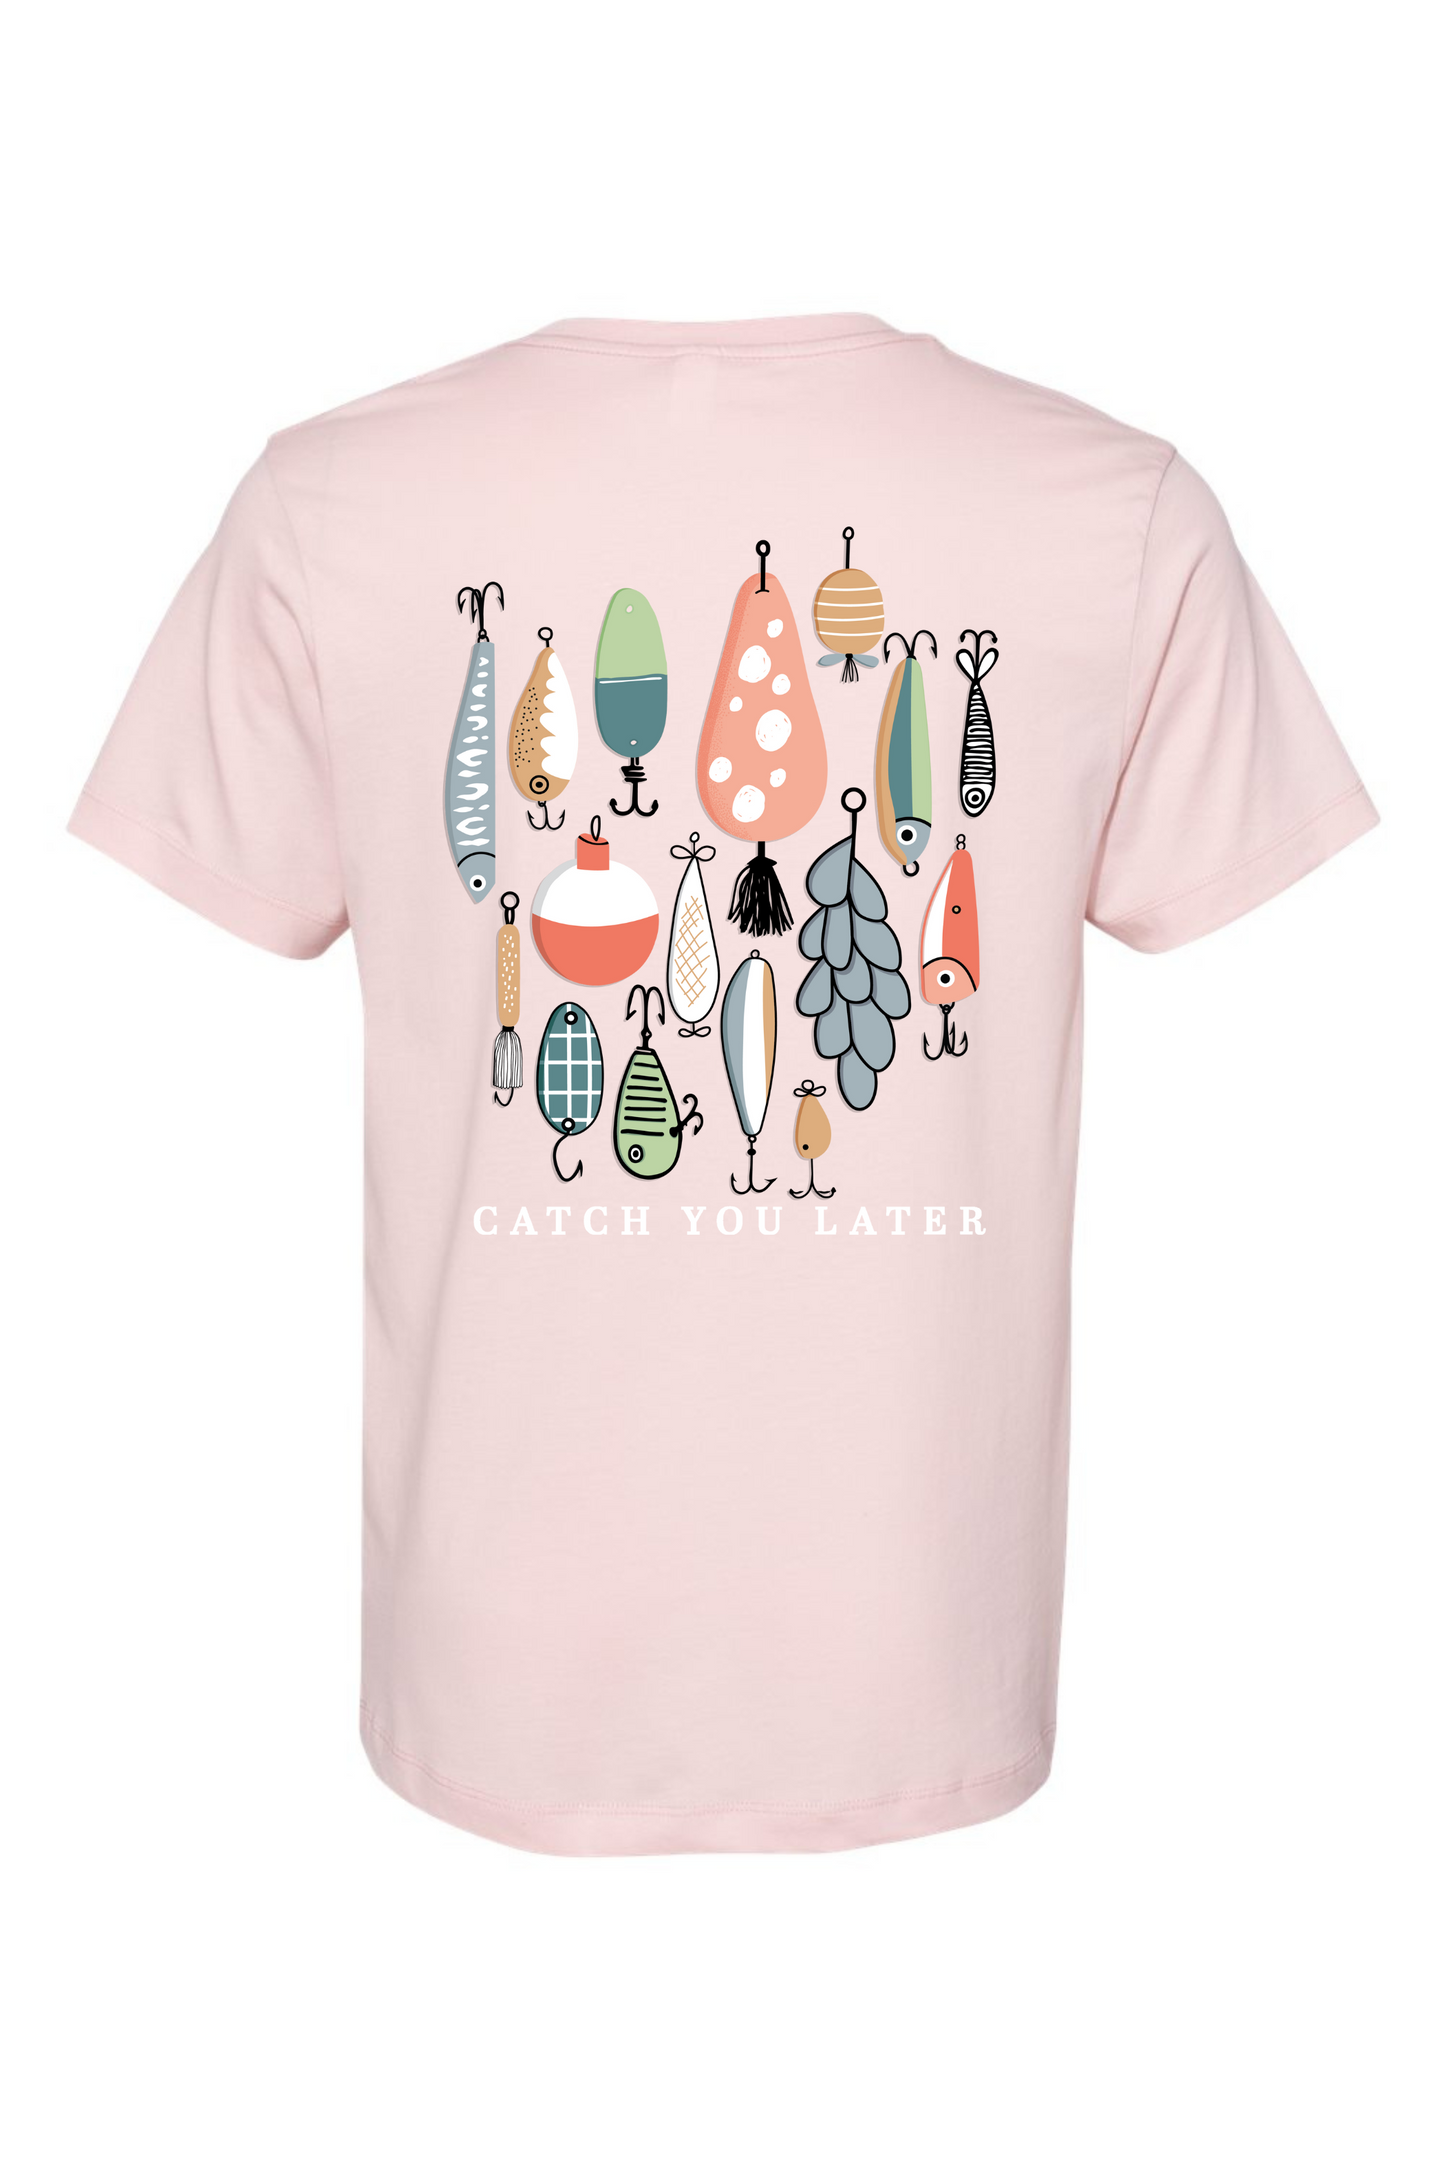 Catch You Later | Women's Tee-Sister Shirts-Sister Shirts, Cute & Custom Tees for Mama & Littles in Trussville, Alabama.